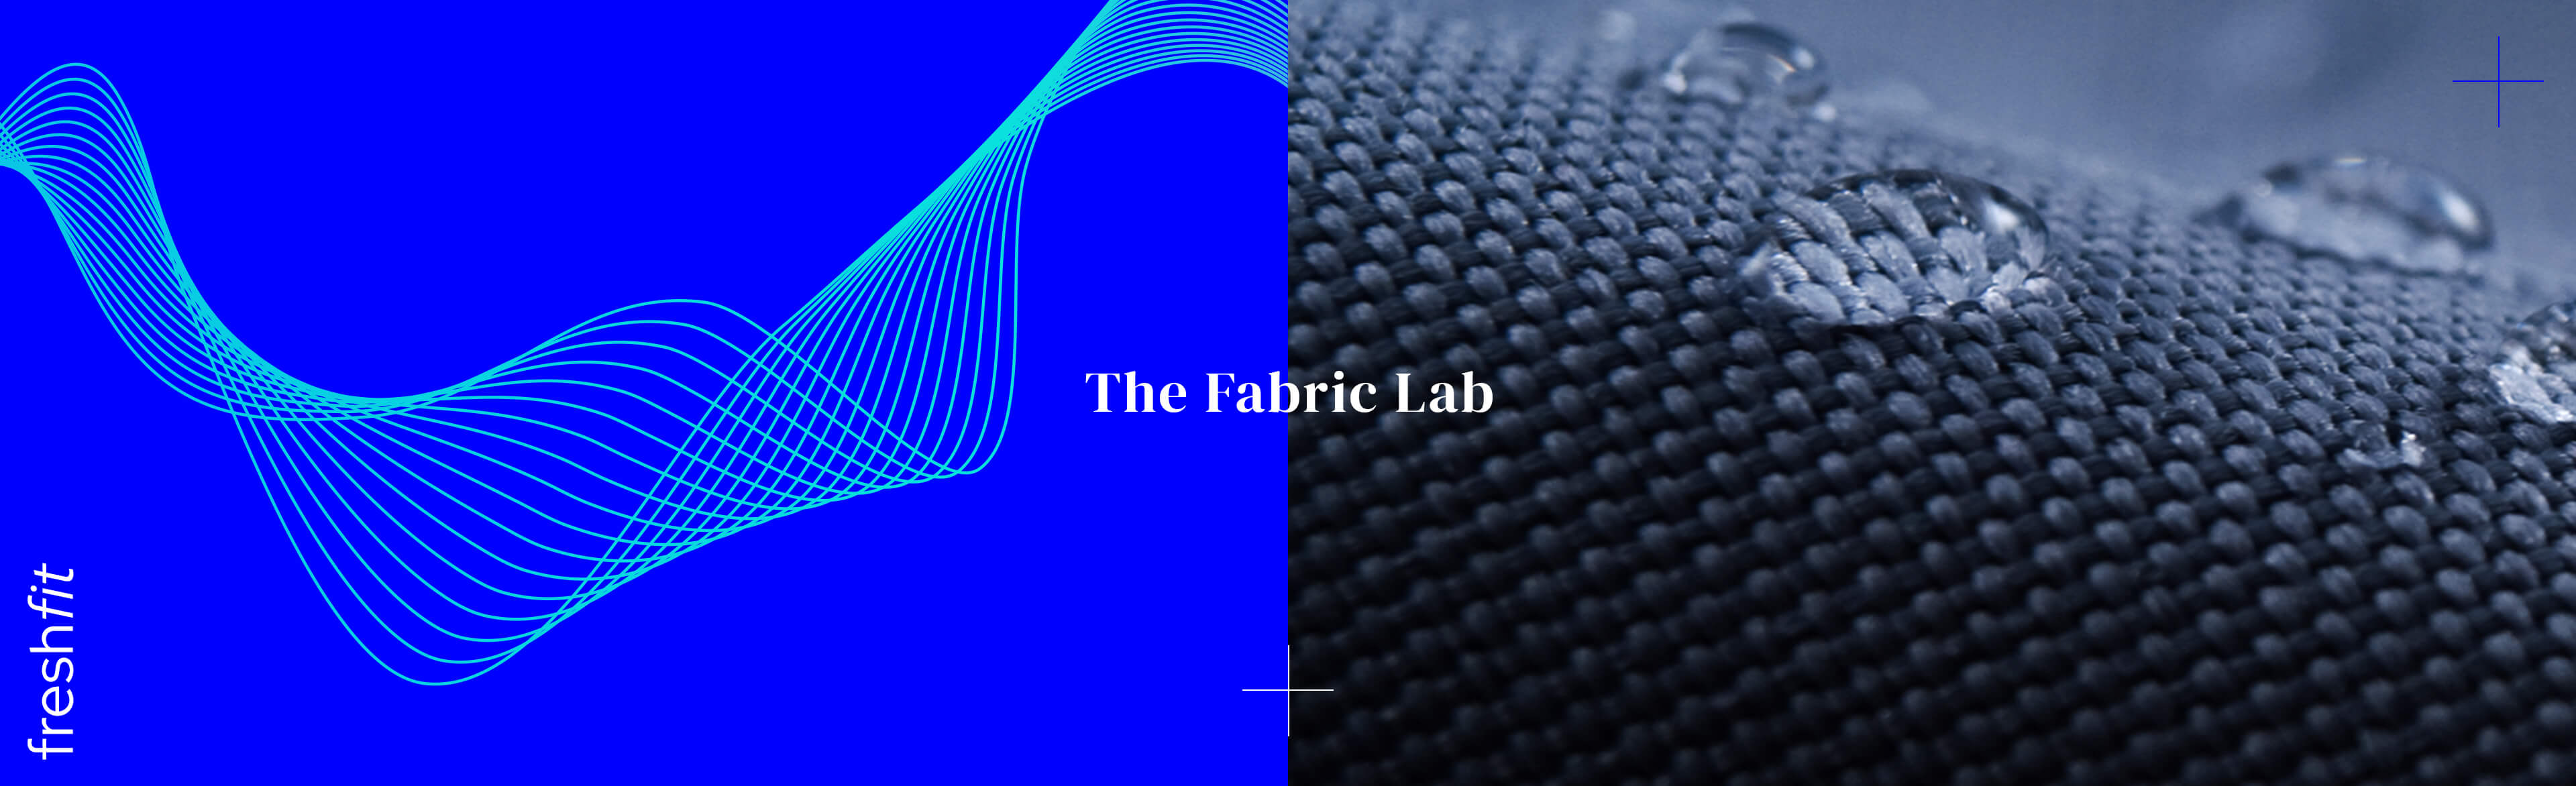 The fabric lab. A piece of fabric with some water drops on it.